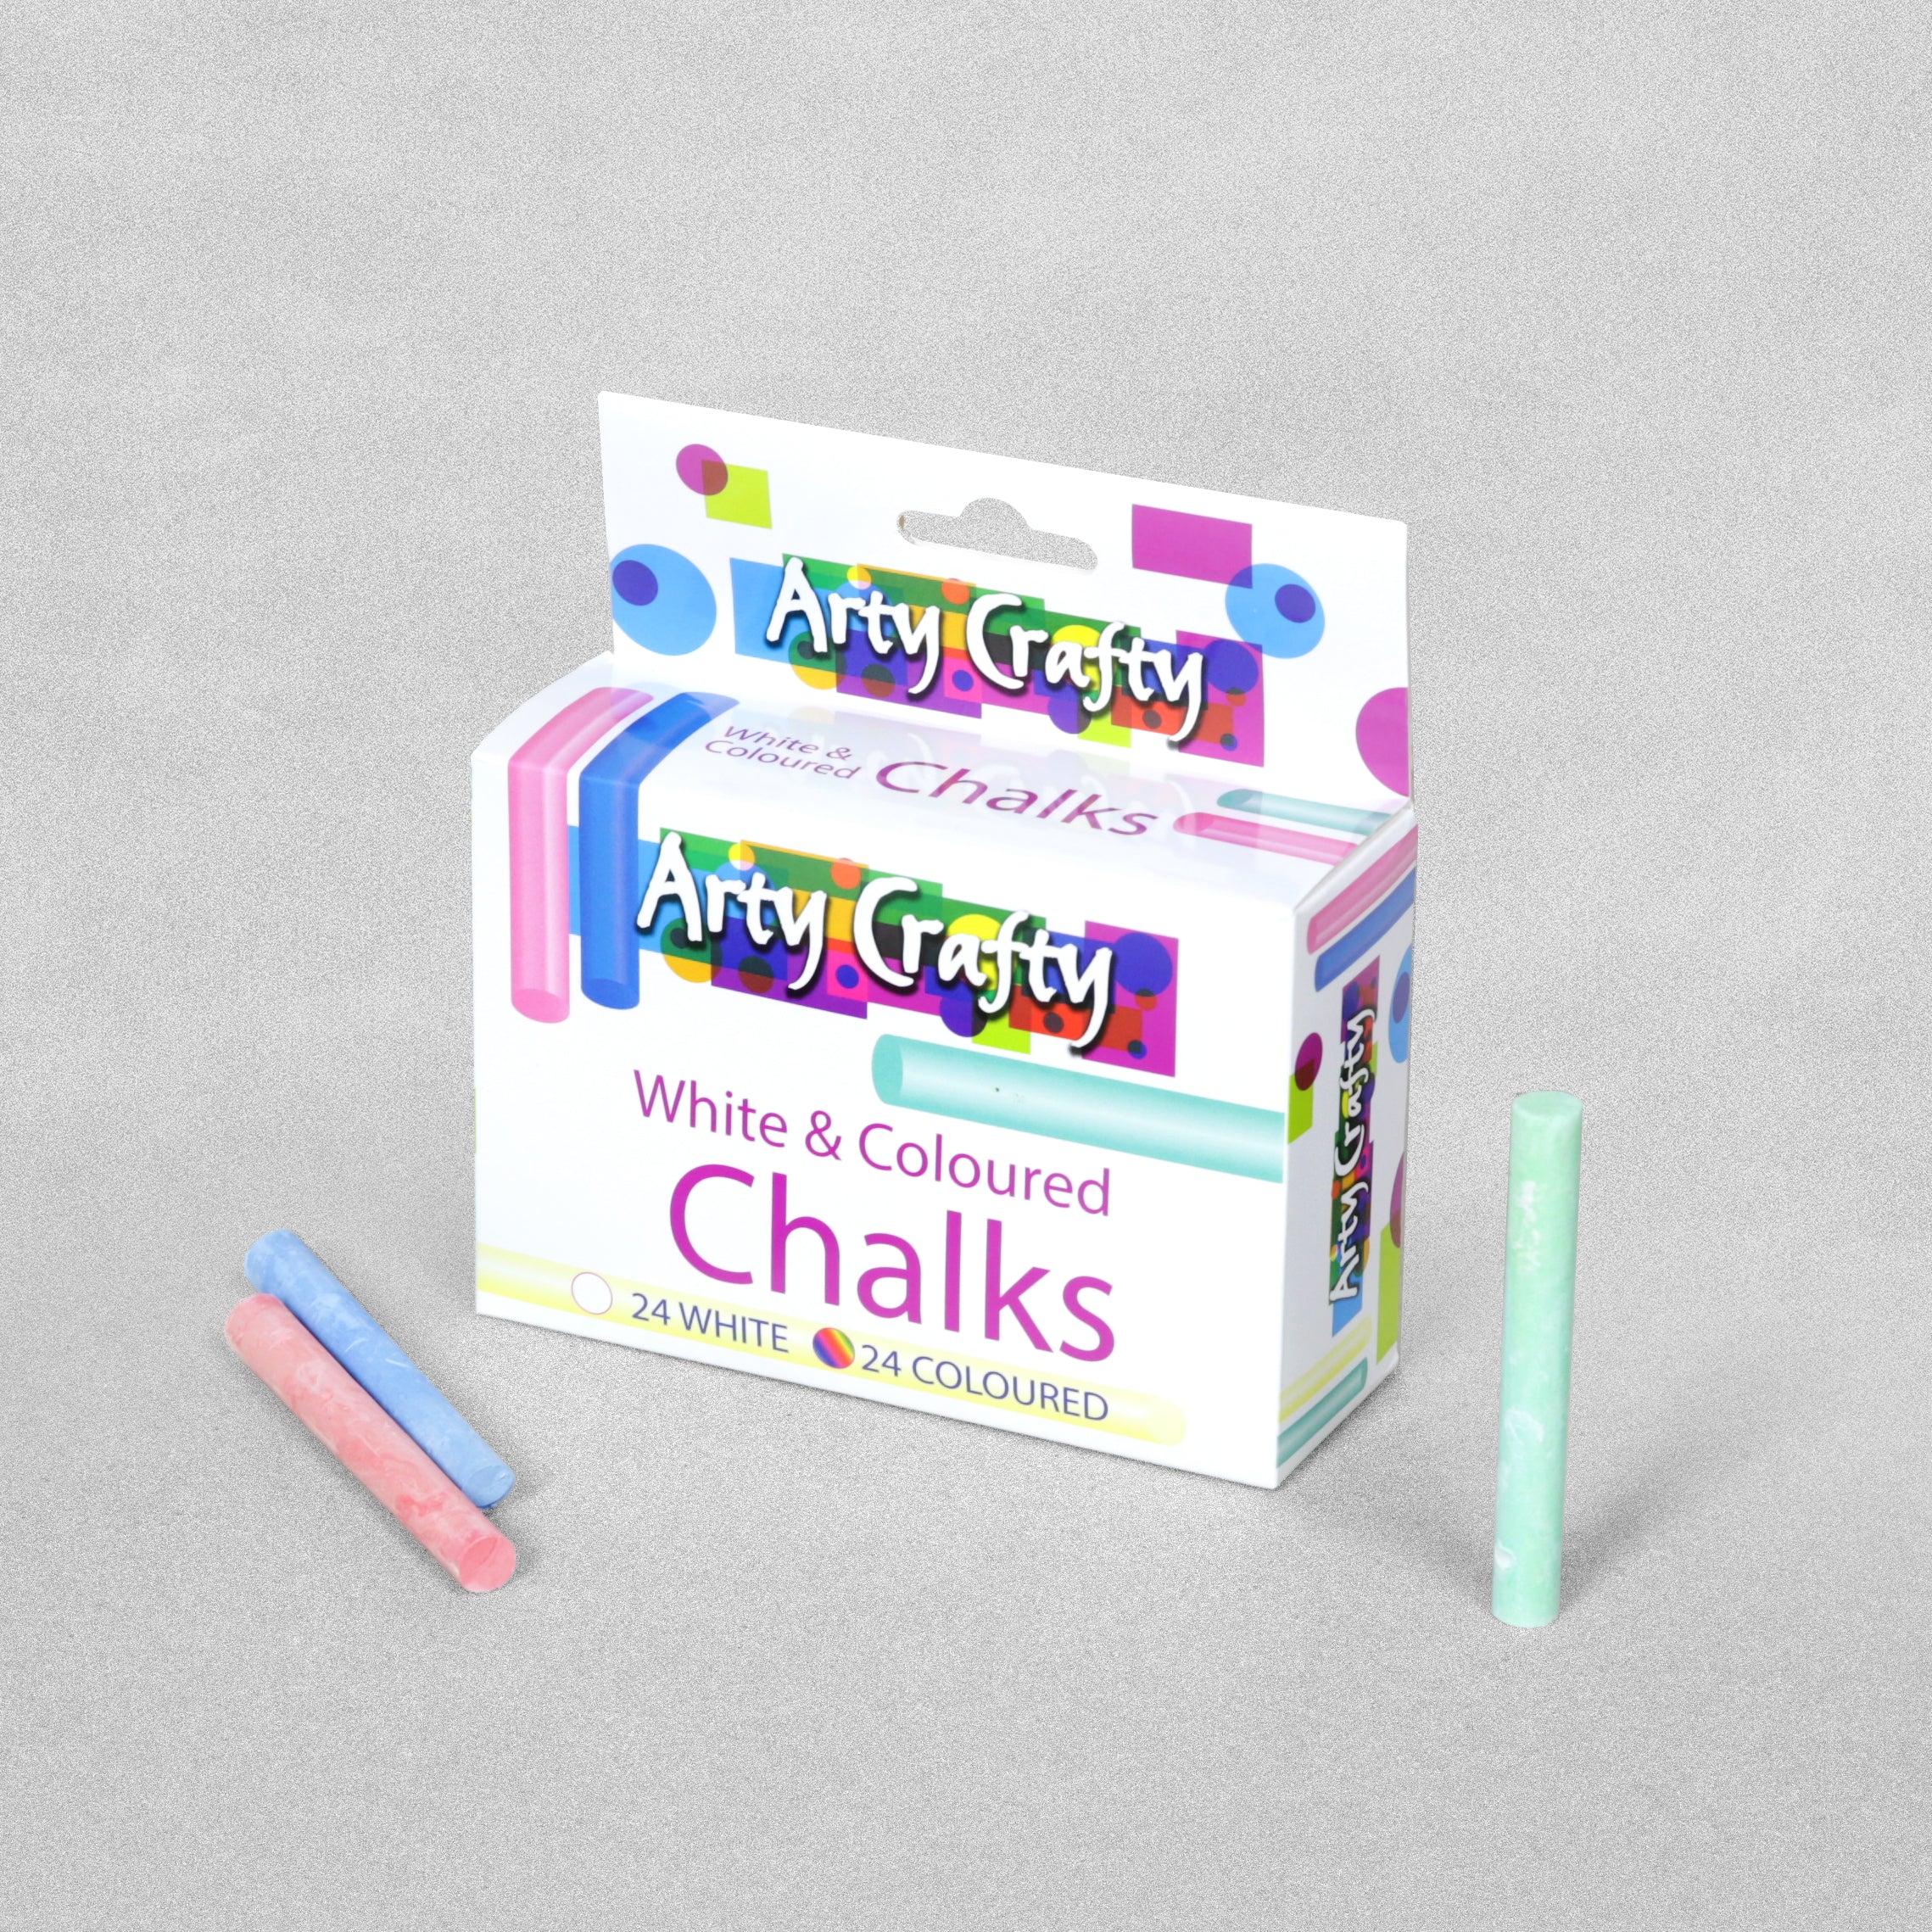 Arty Crafty Coloured & White Chalk - Pack of 48